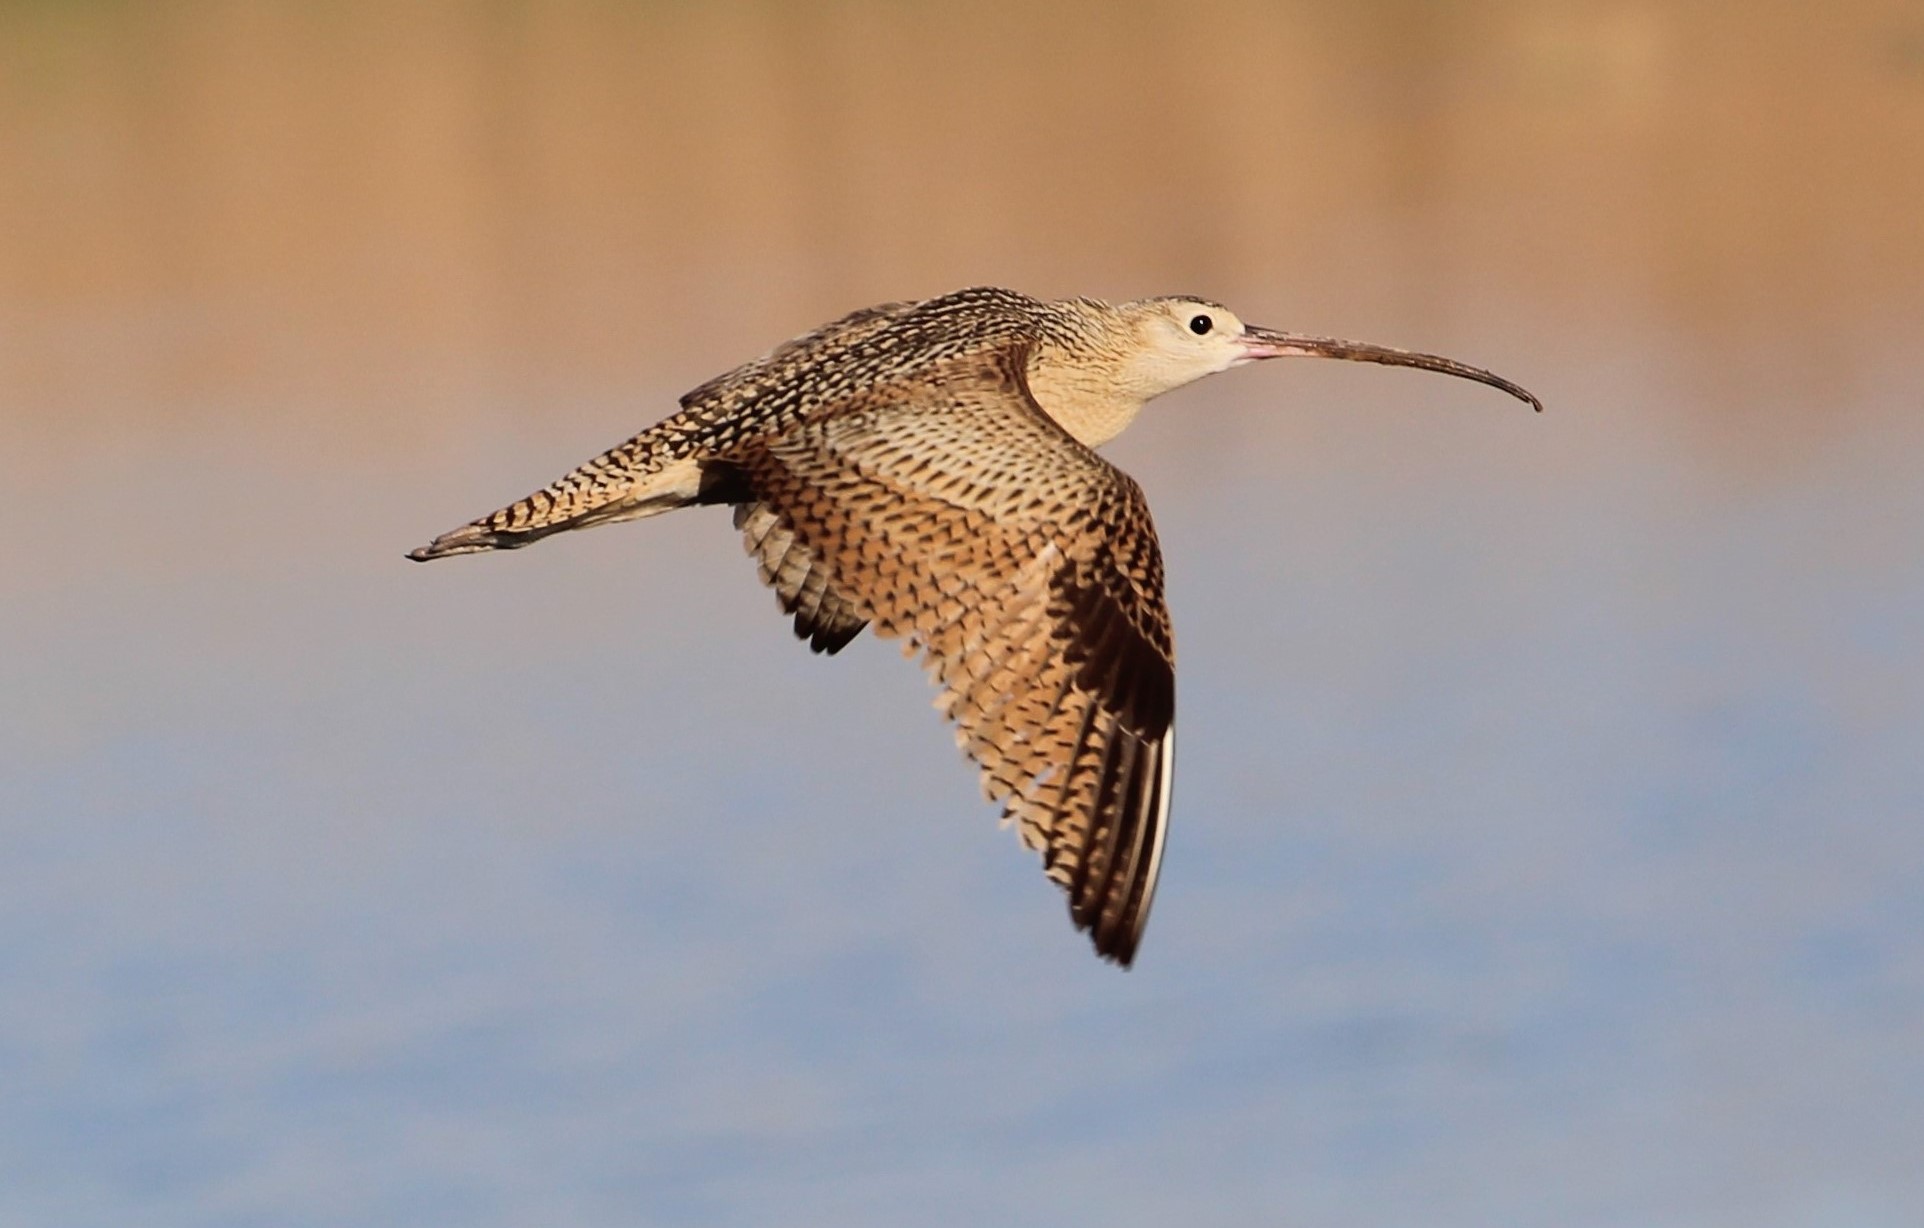 Photo by Buddy Walker  |  Long-billed Curlew in flight to new Hunting location